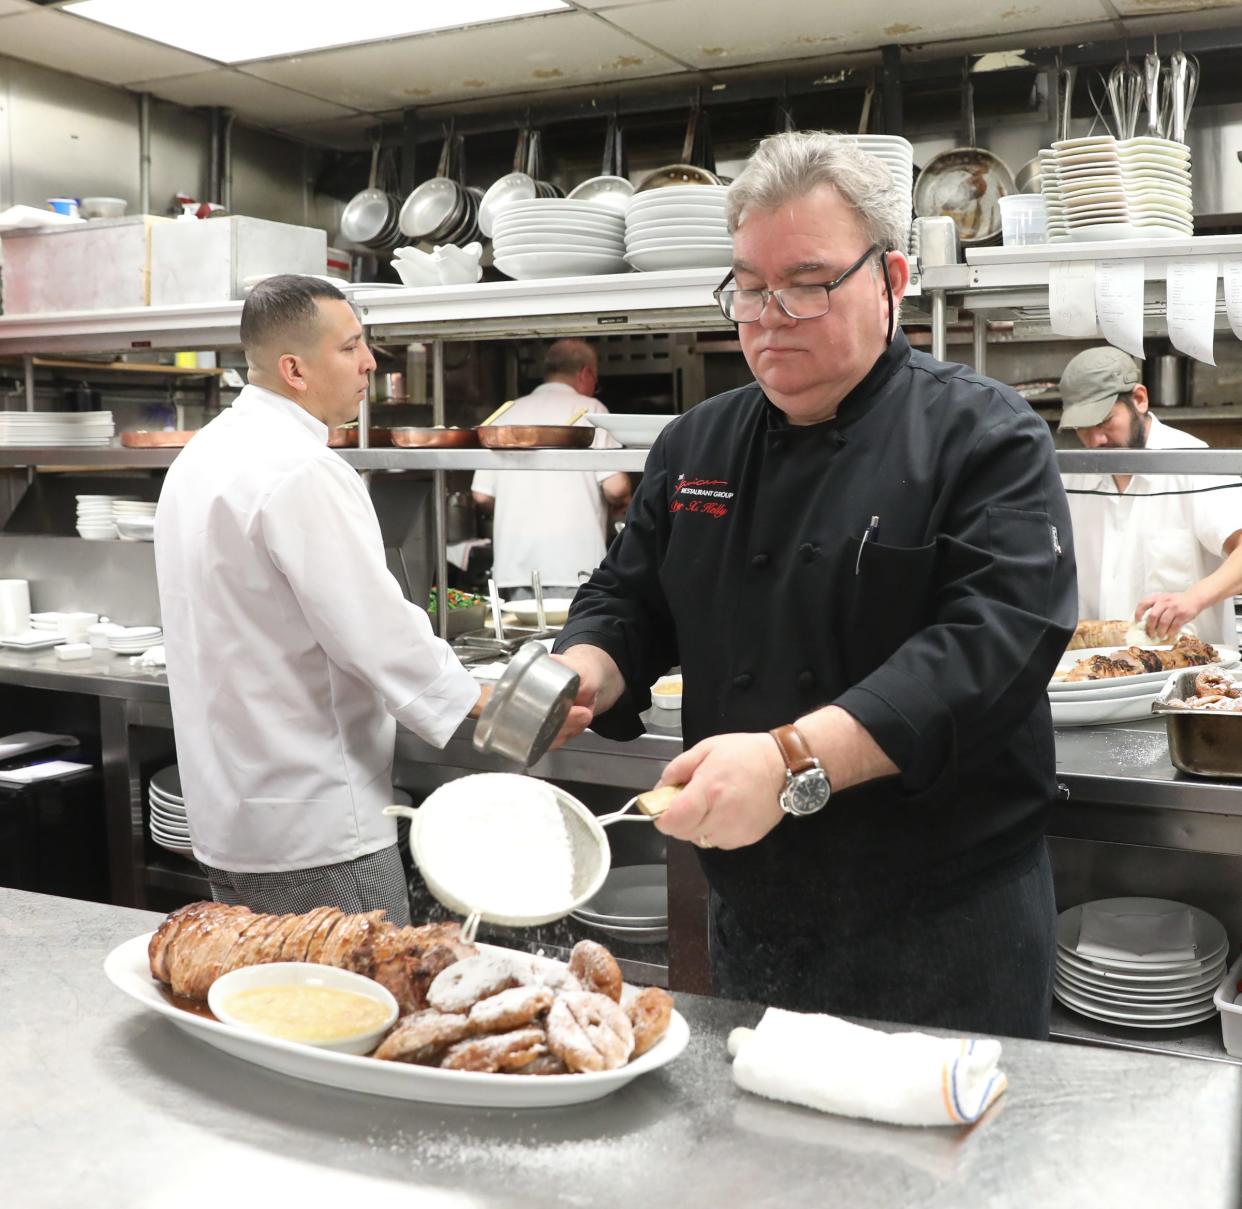 Chef Peter Kelly preparing Roasted Pork with Apple Sauce and Apple Fritters for Sunday brunch at Restaurant X in Congers in January 2019. The restaurant's Sunday multi-course brunch was legendary.